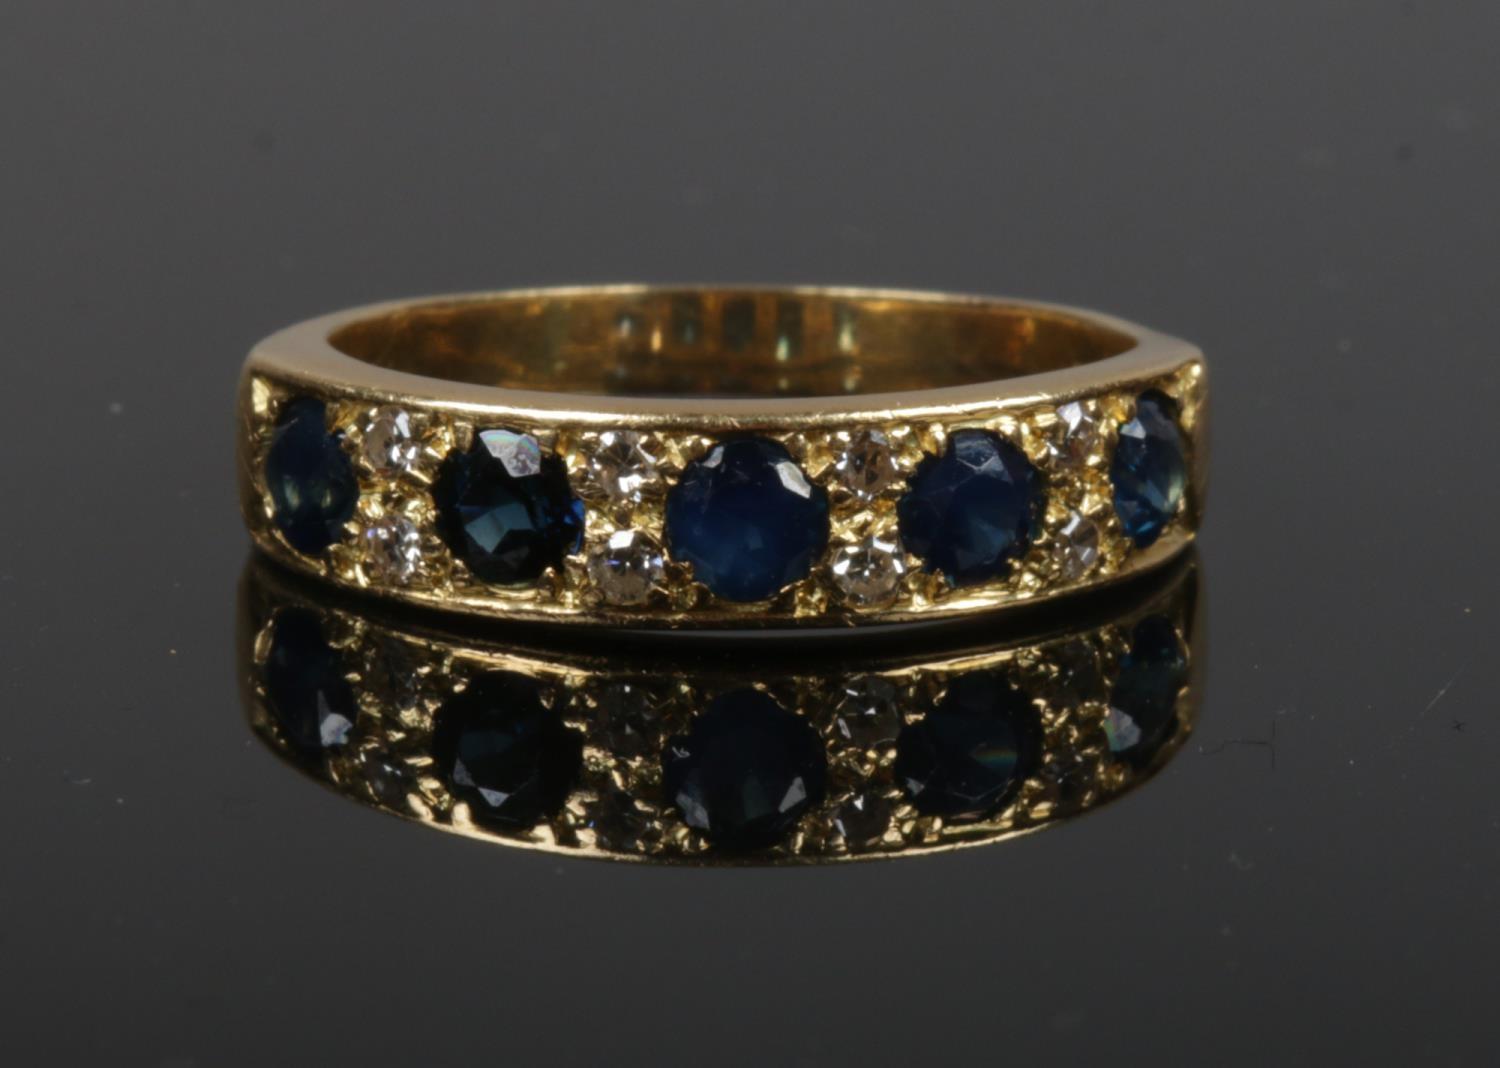 A gold, diamond and sapphire ring. Set with five sapphires interspersed with four pairs of diamonds.